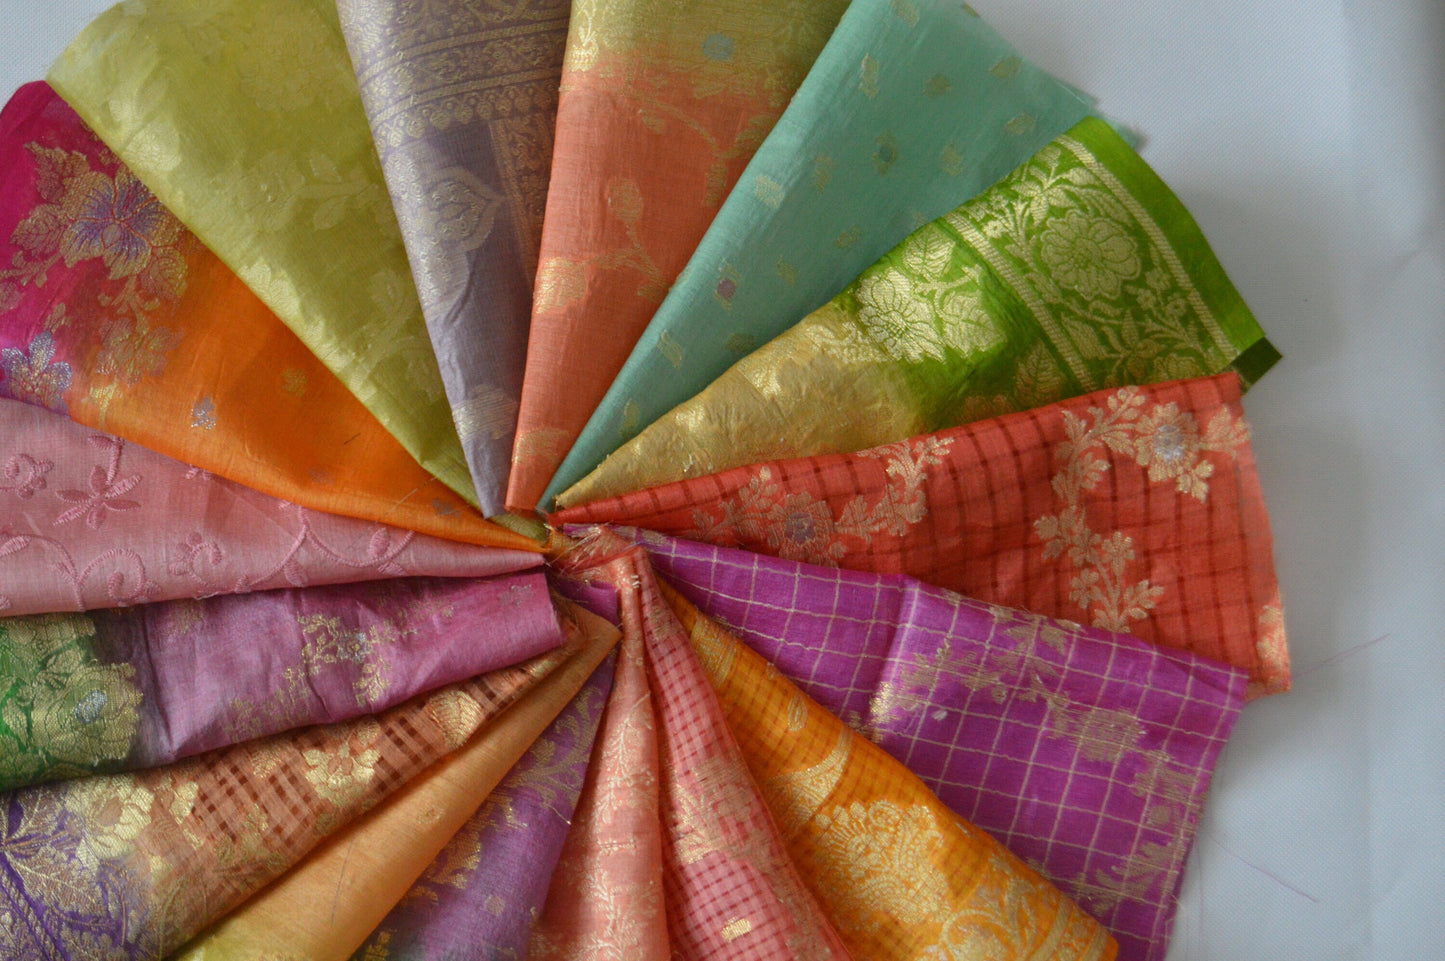 10 Inch x 16 Pieces Mixed Colour Recycled Vintage Sari Scraps Remnant Brocade Craft Fabric Collage Mixed Media Textile Art Junk Journals